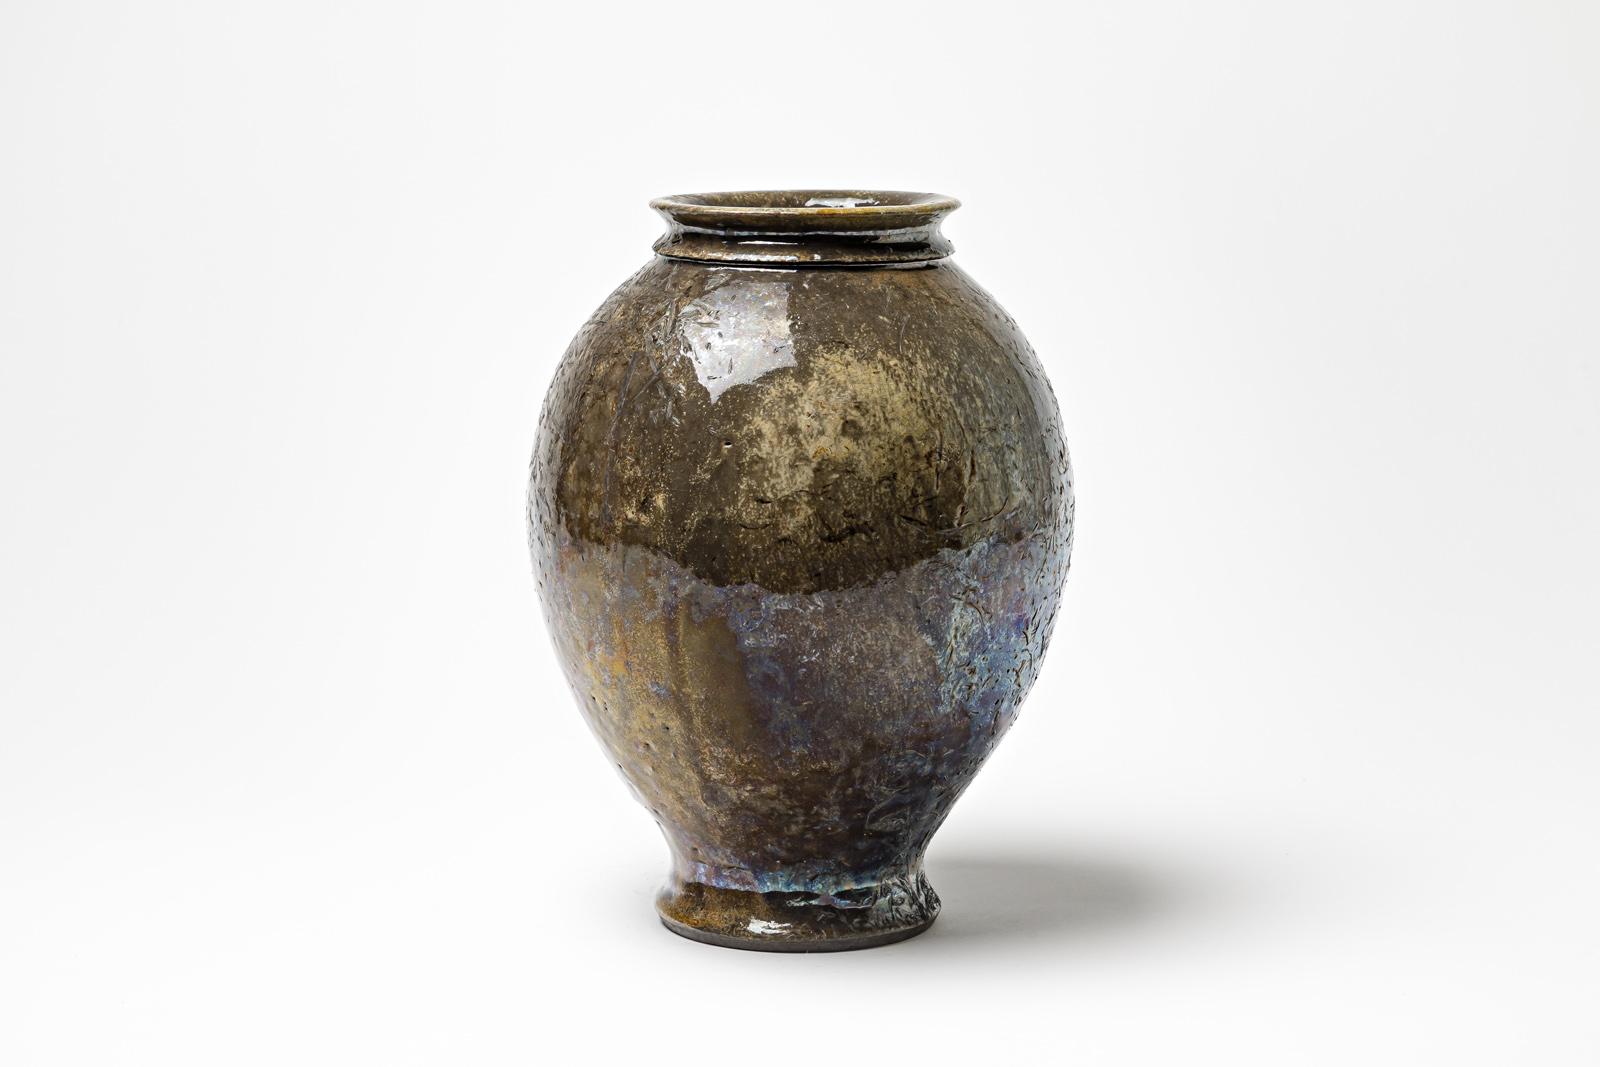 French Brown glazed ceramic vase with metallic highlights by Gisèle Buthod Garçon, 1990 For Sale